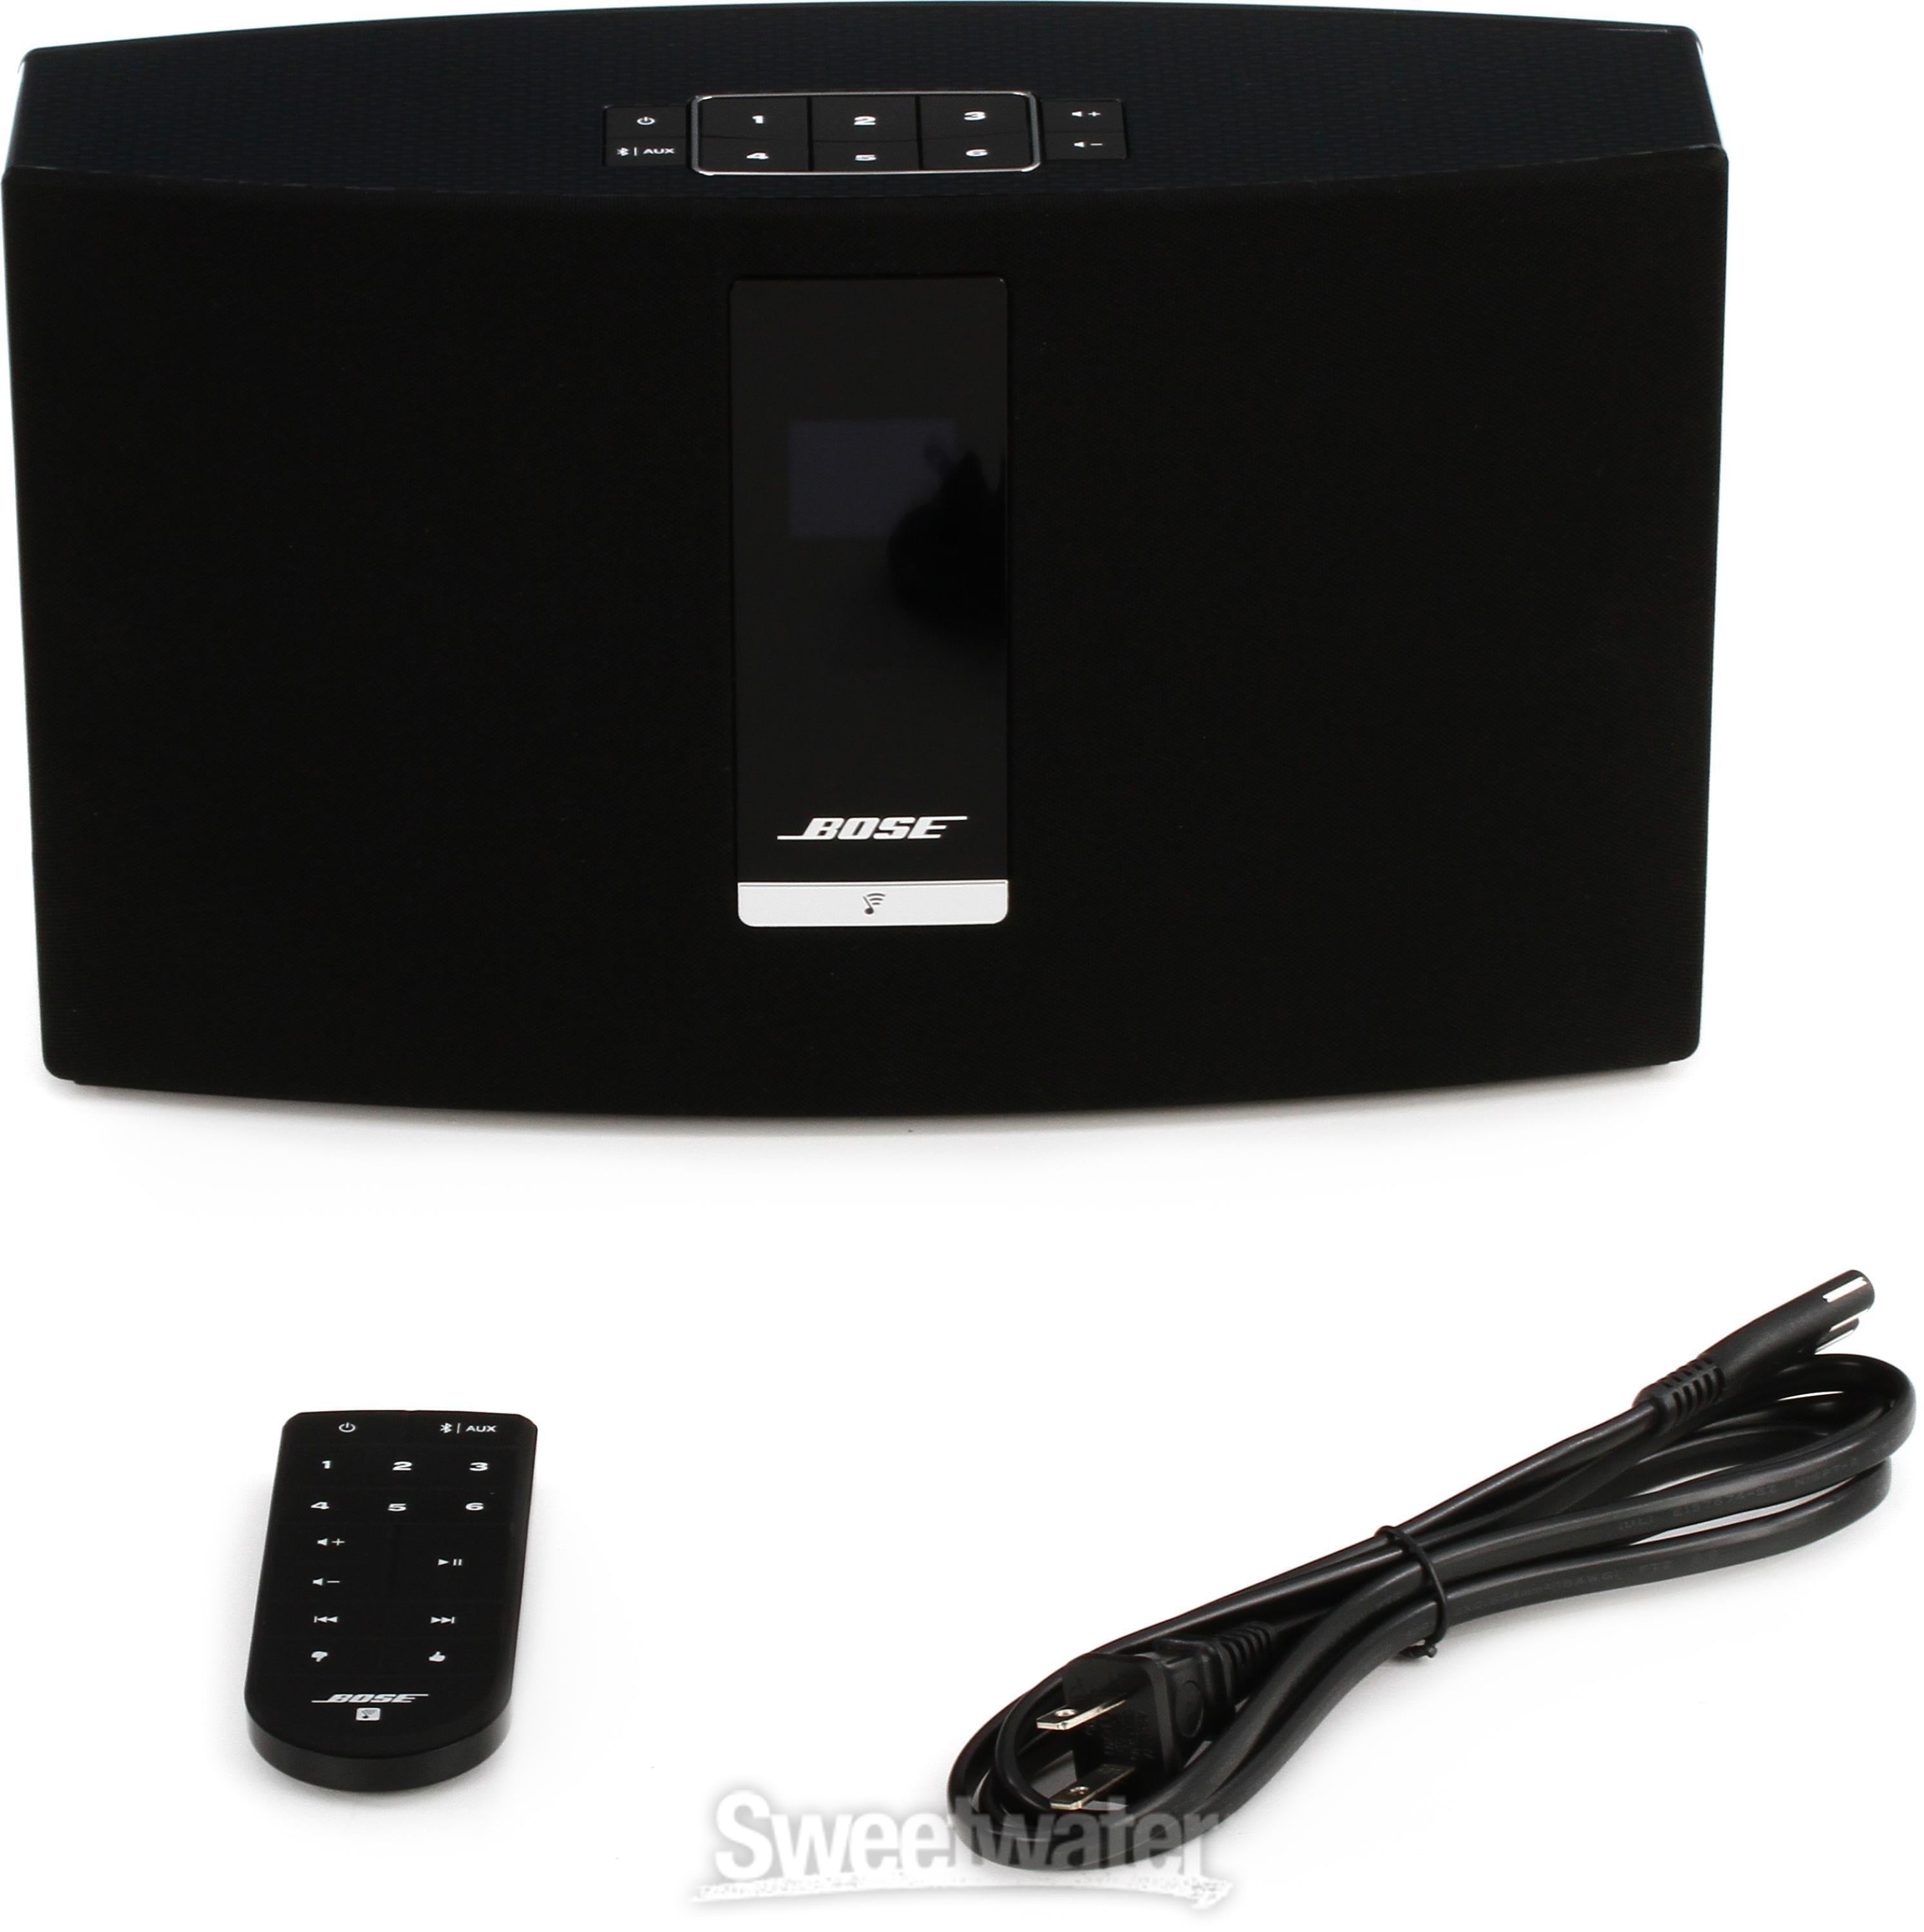 Bose SoundTouch 20 Series III Wireless Music System - Black 